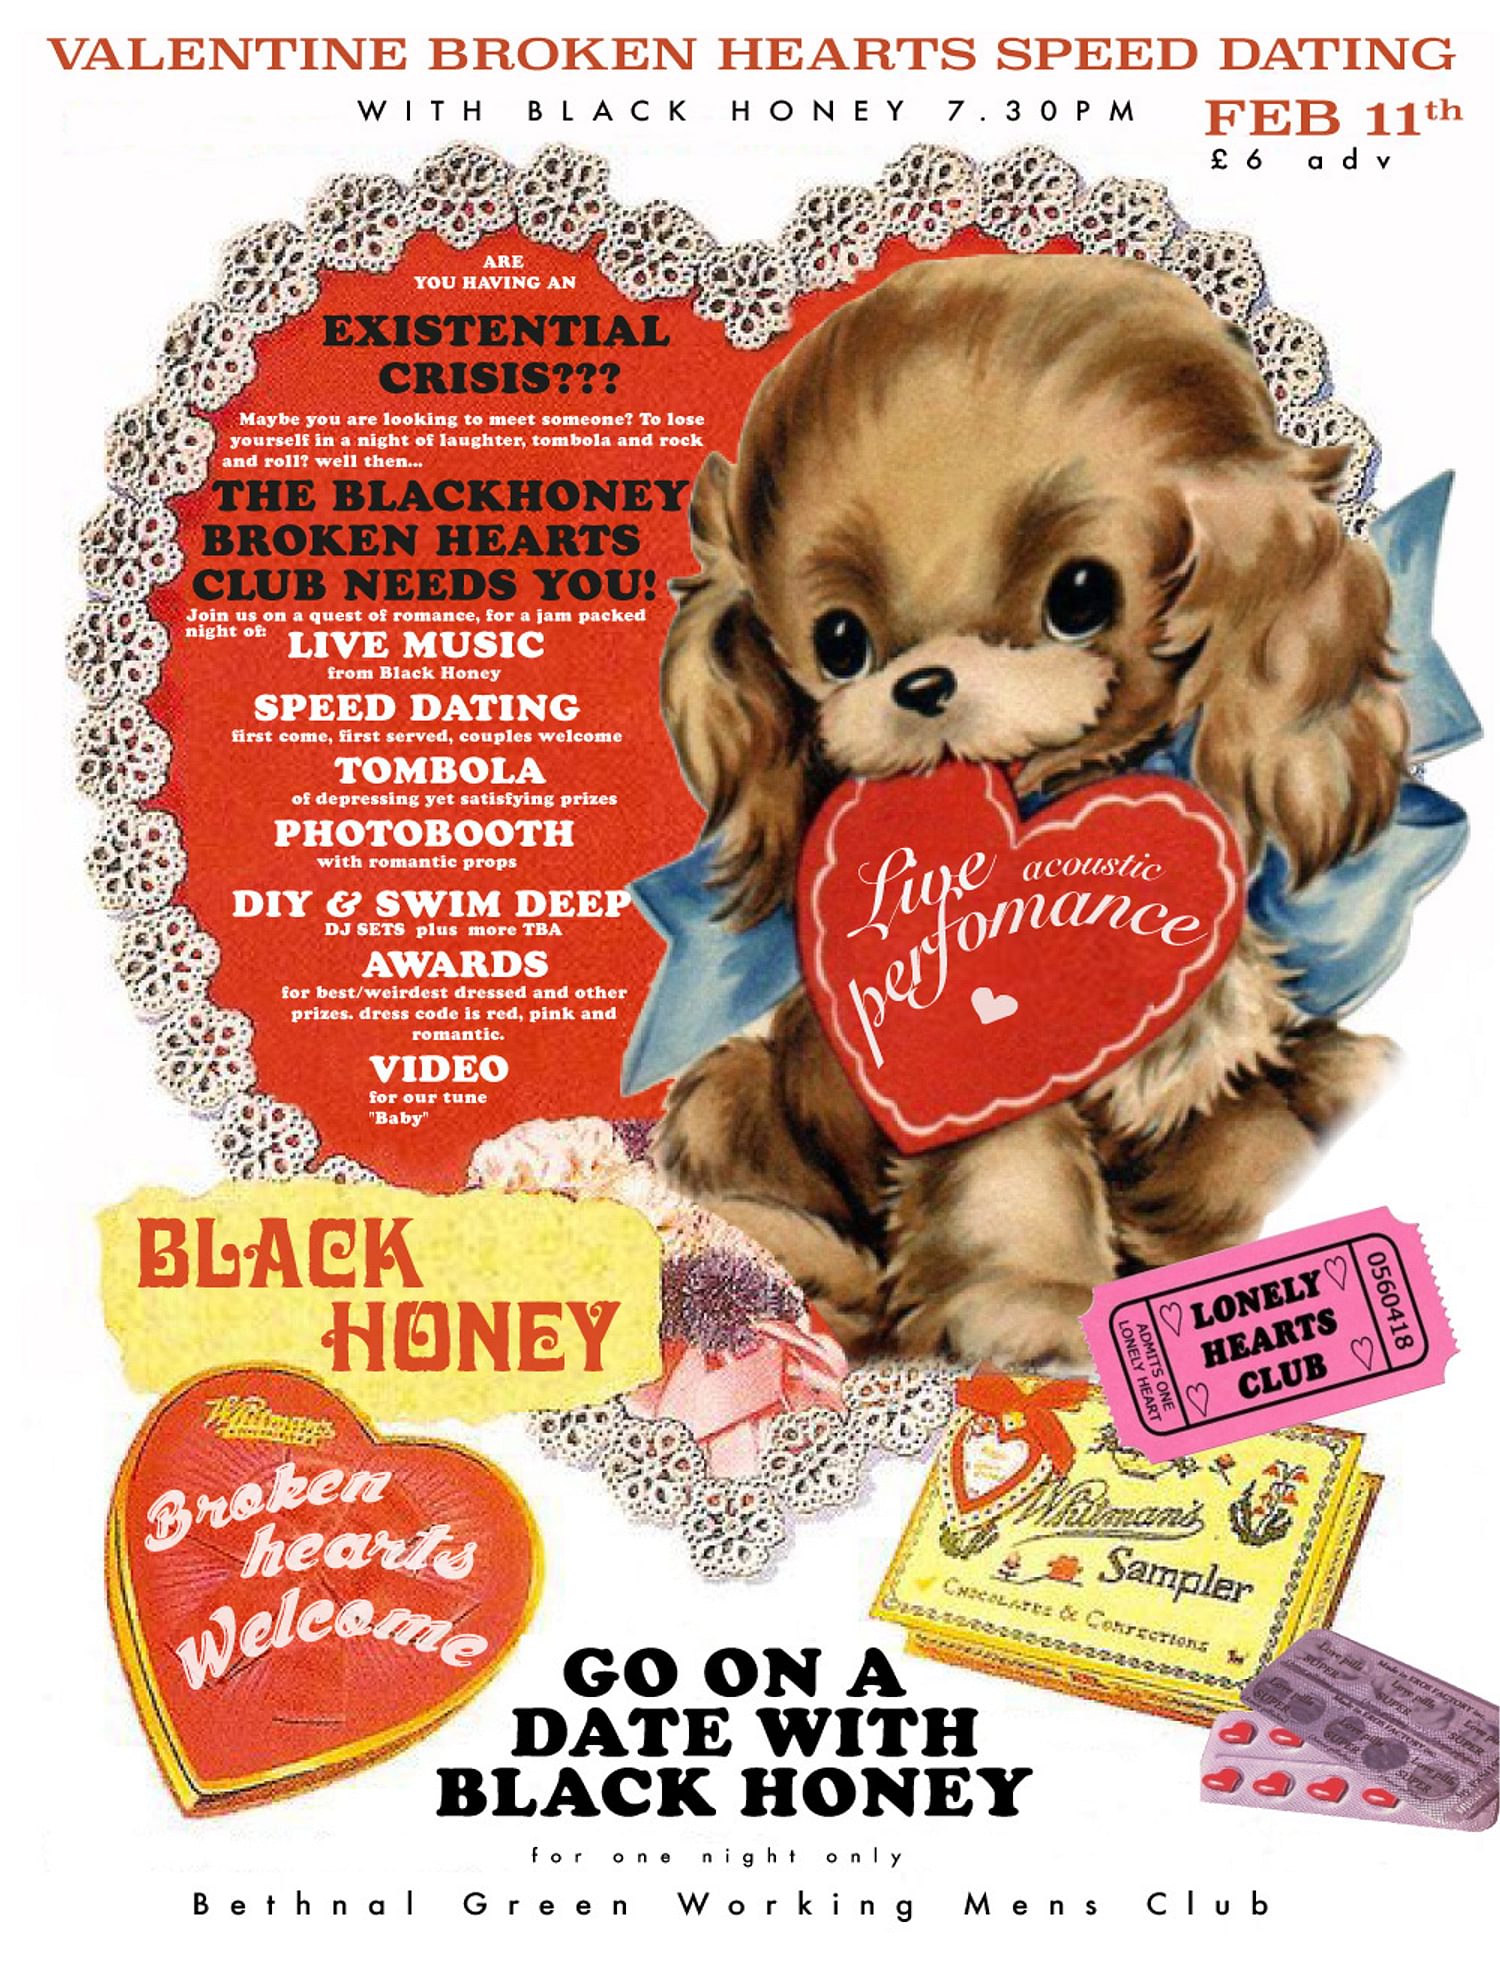 Black Honey are throwing a Valentine's Day party (with speed dating!)